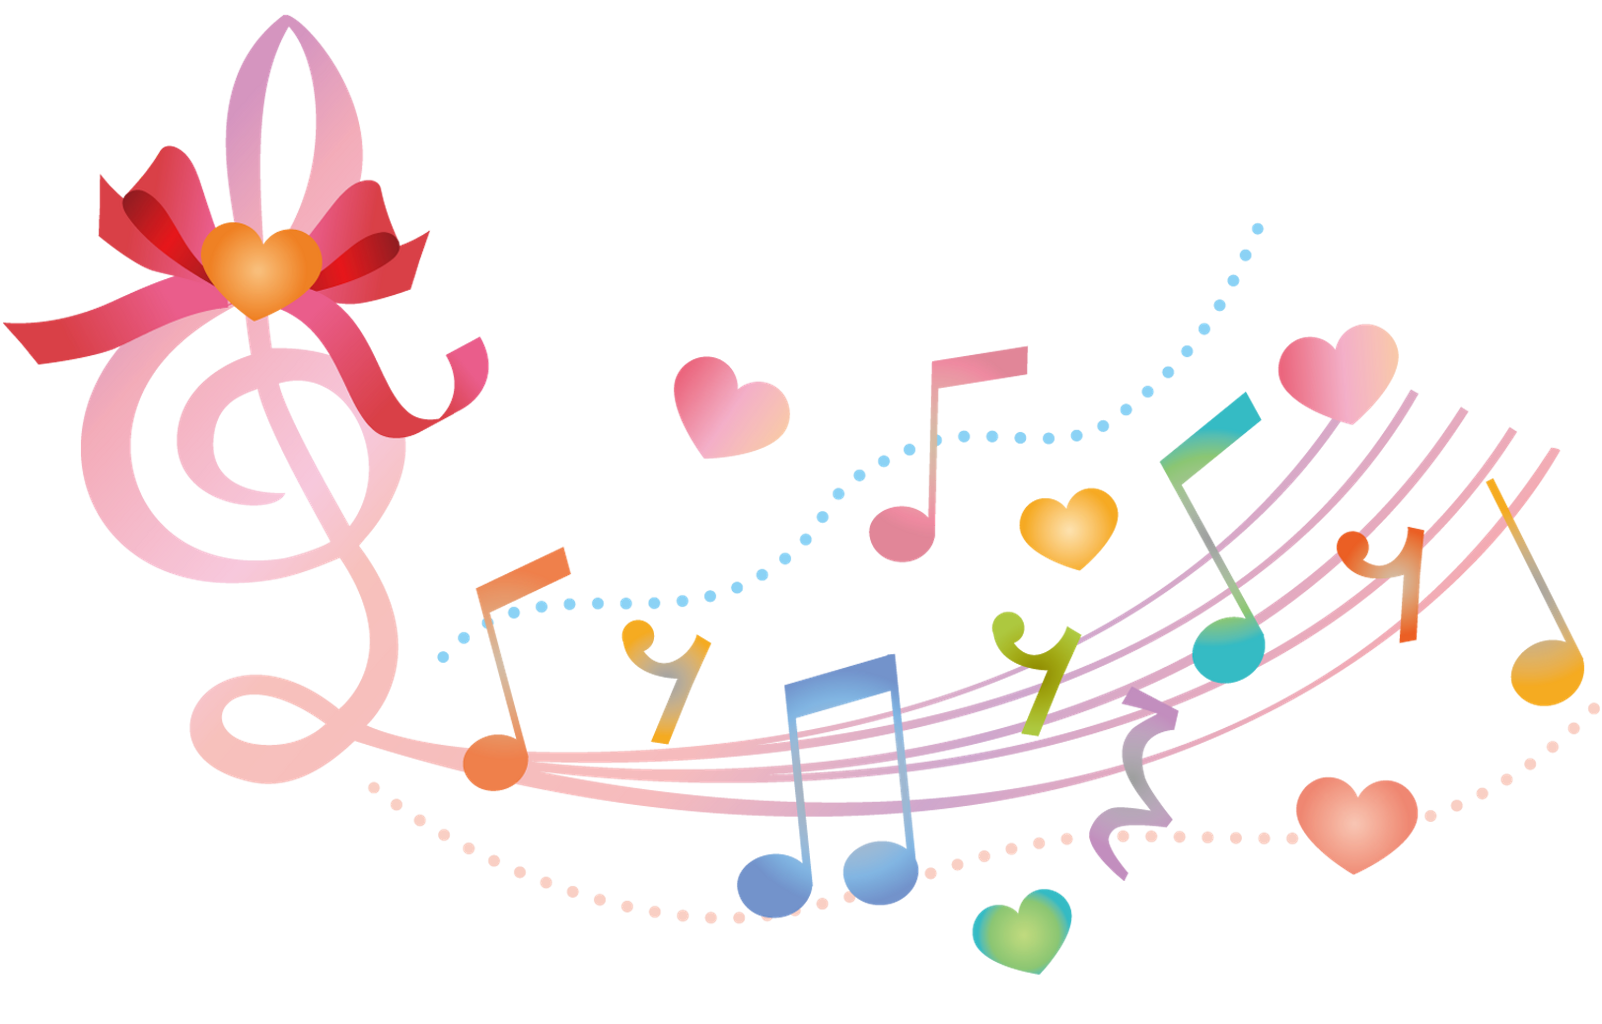 clipart music watercolor